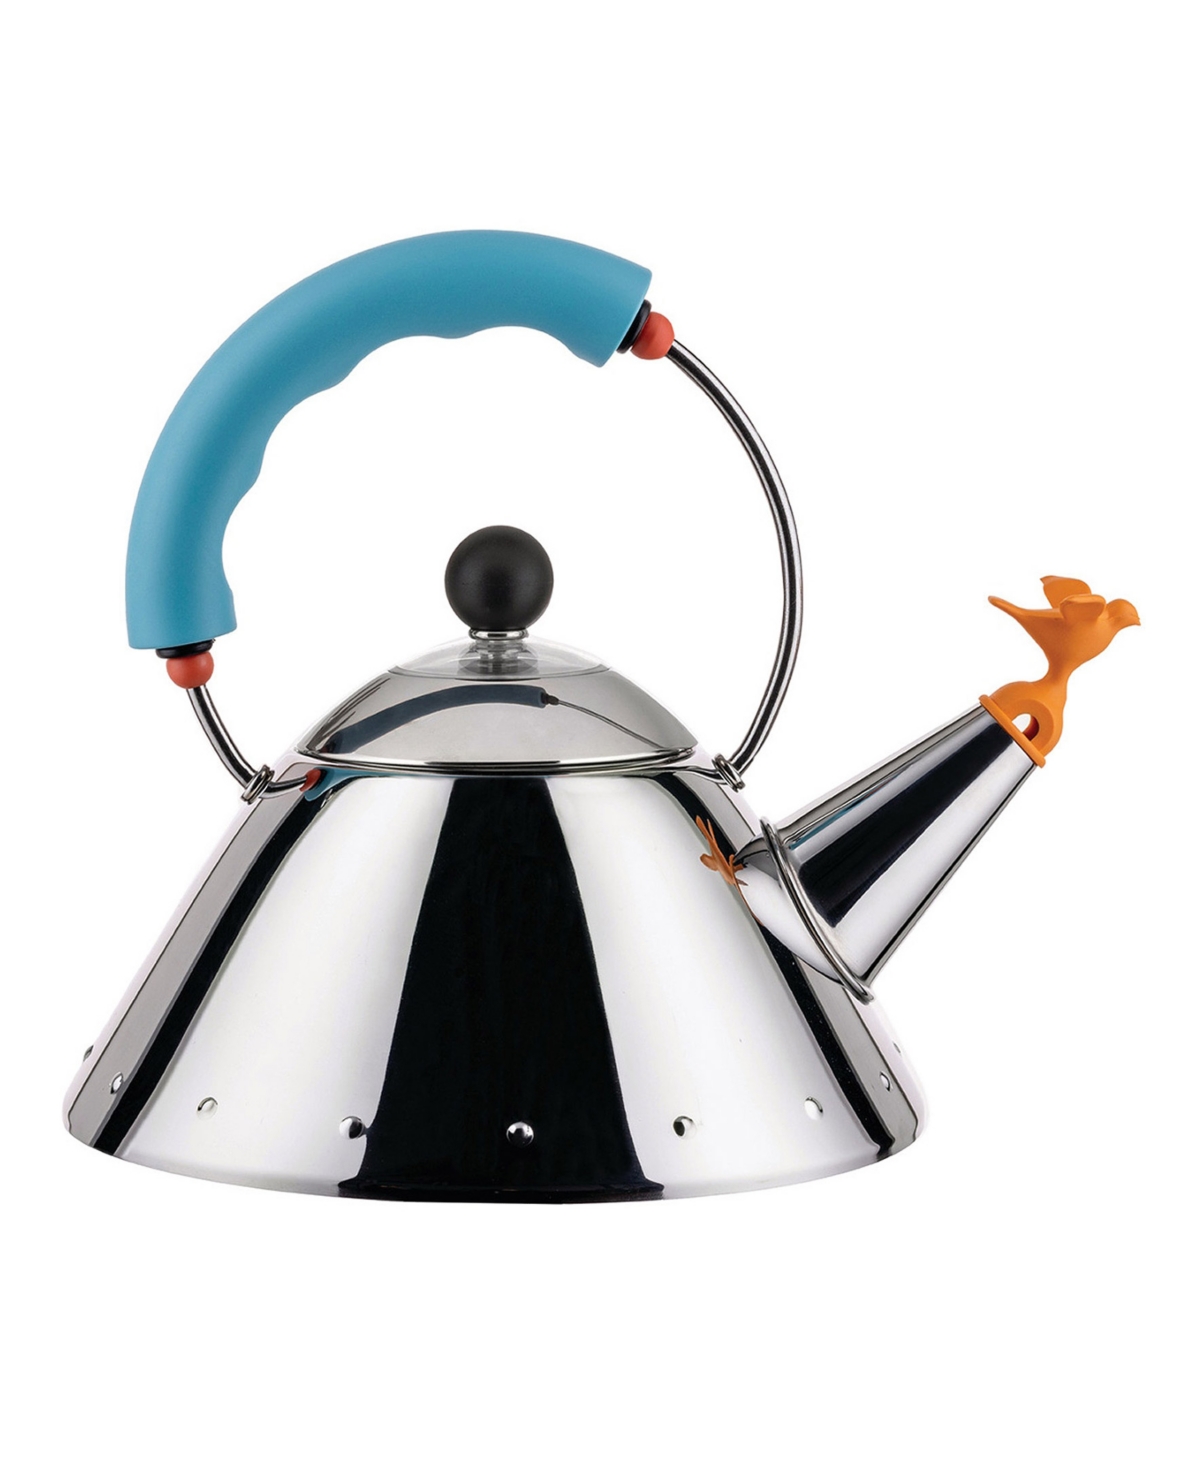 Alessi 1 Quart Tea Kettle By Michael Graves In Silver